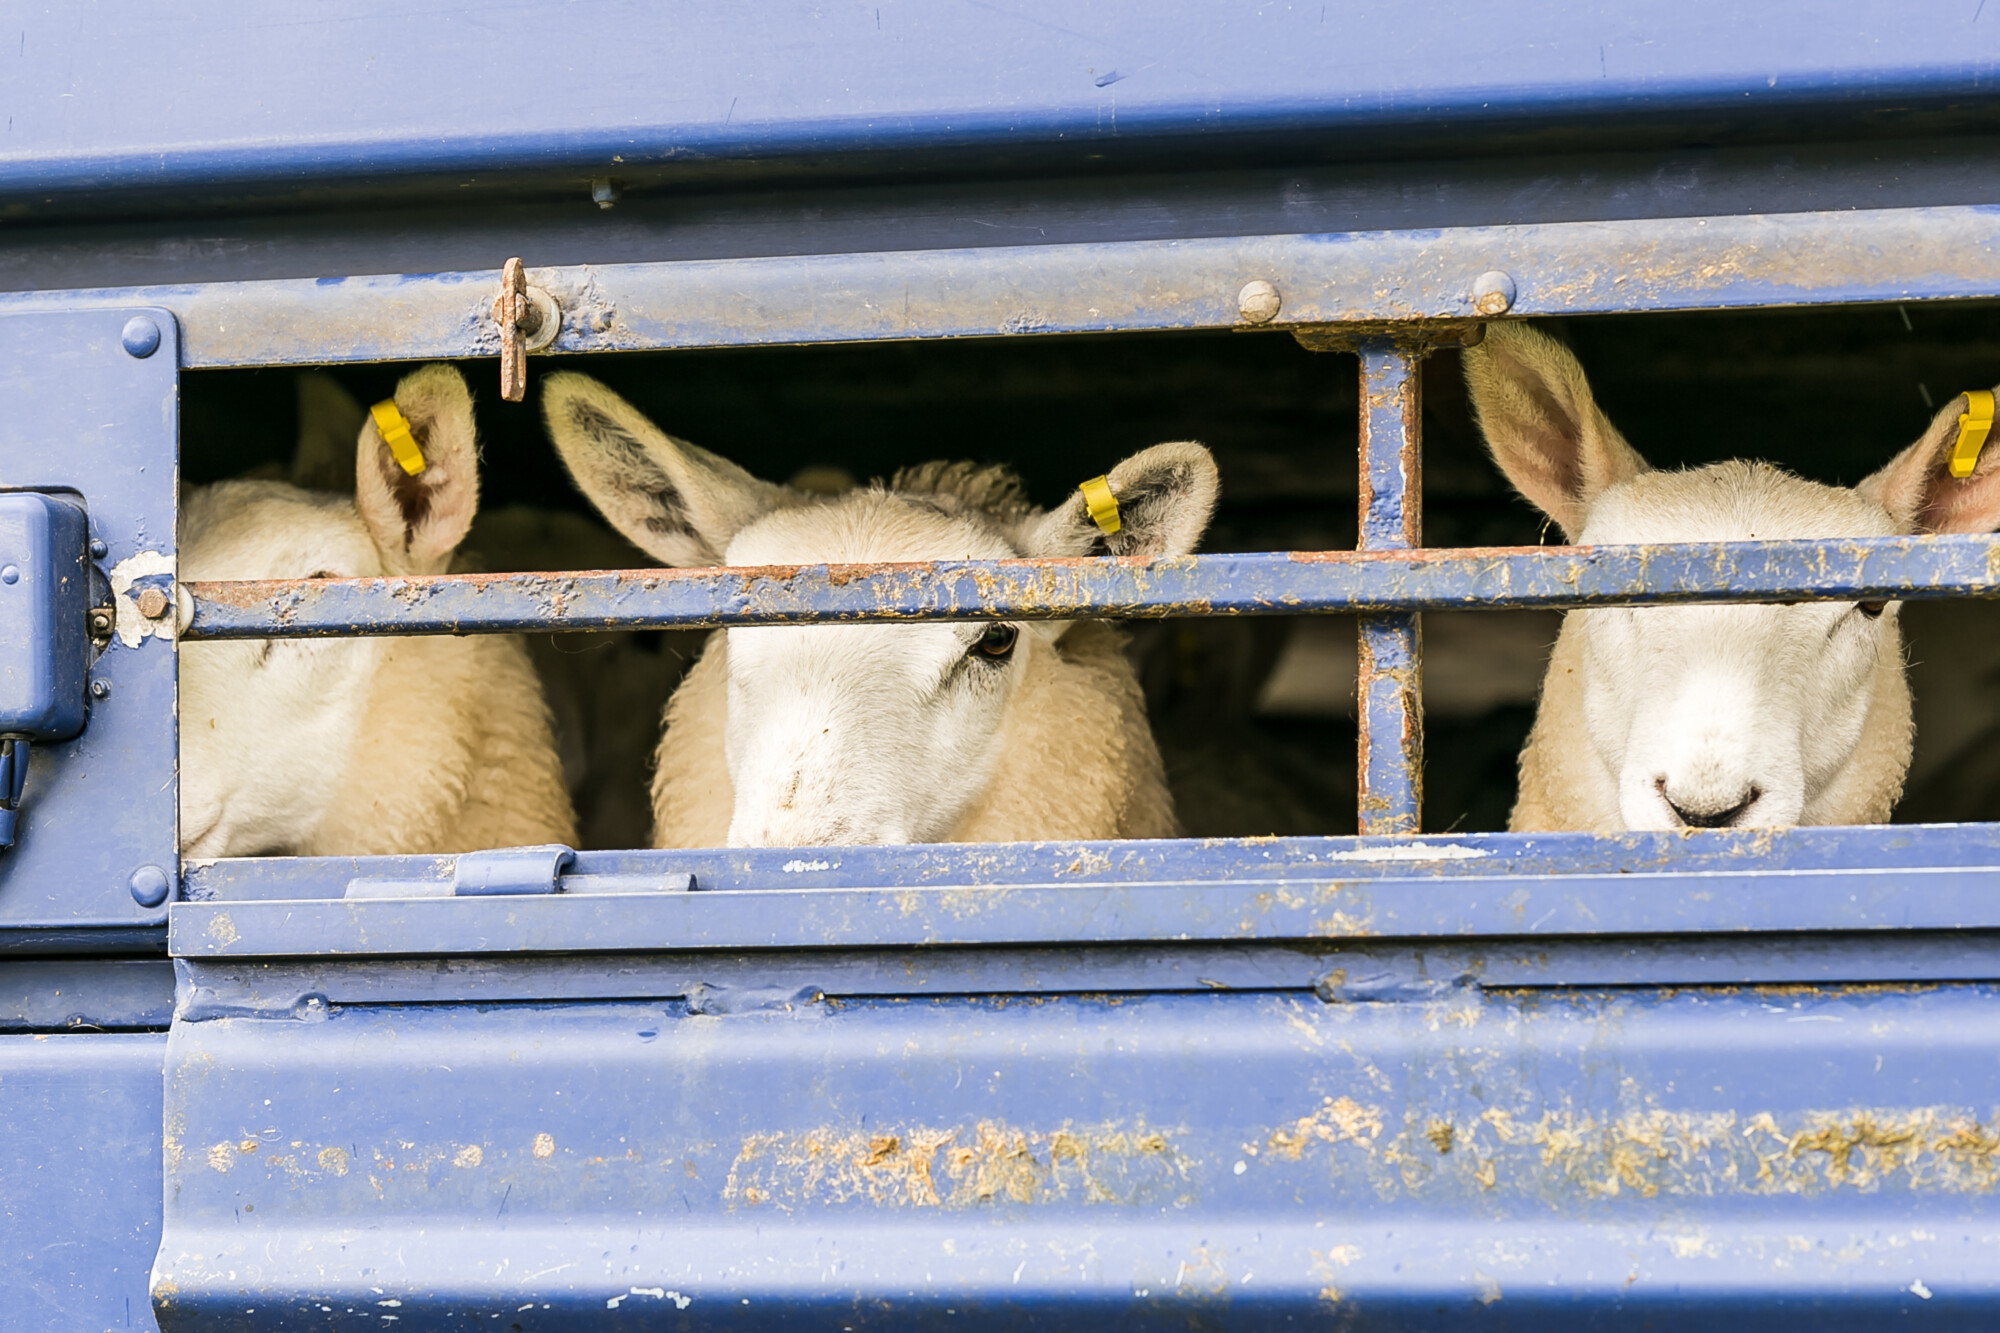 Police issue statements on the theft of over 200 sheep in several raids